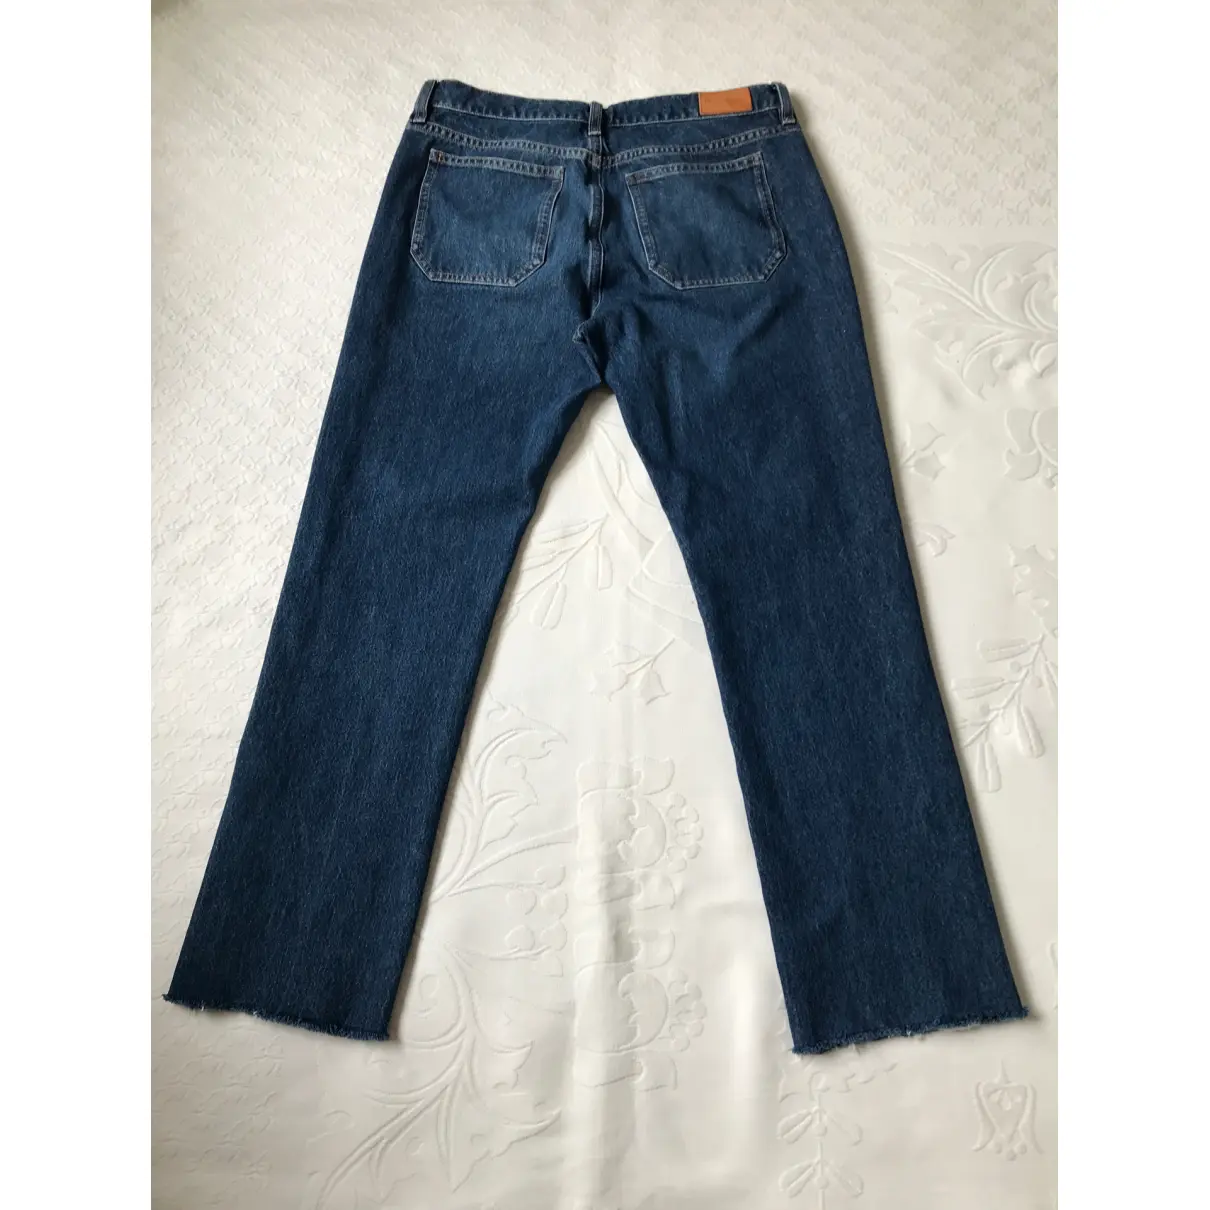 Buy Mih Jeans Straight jeans online